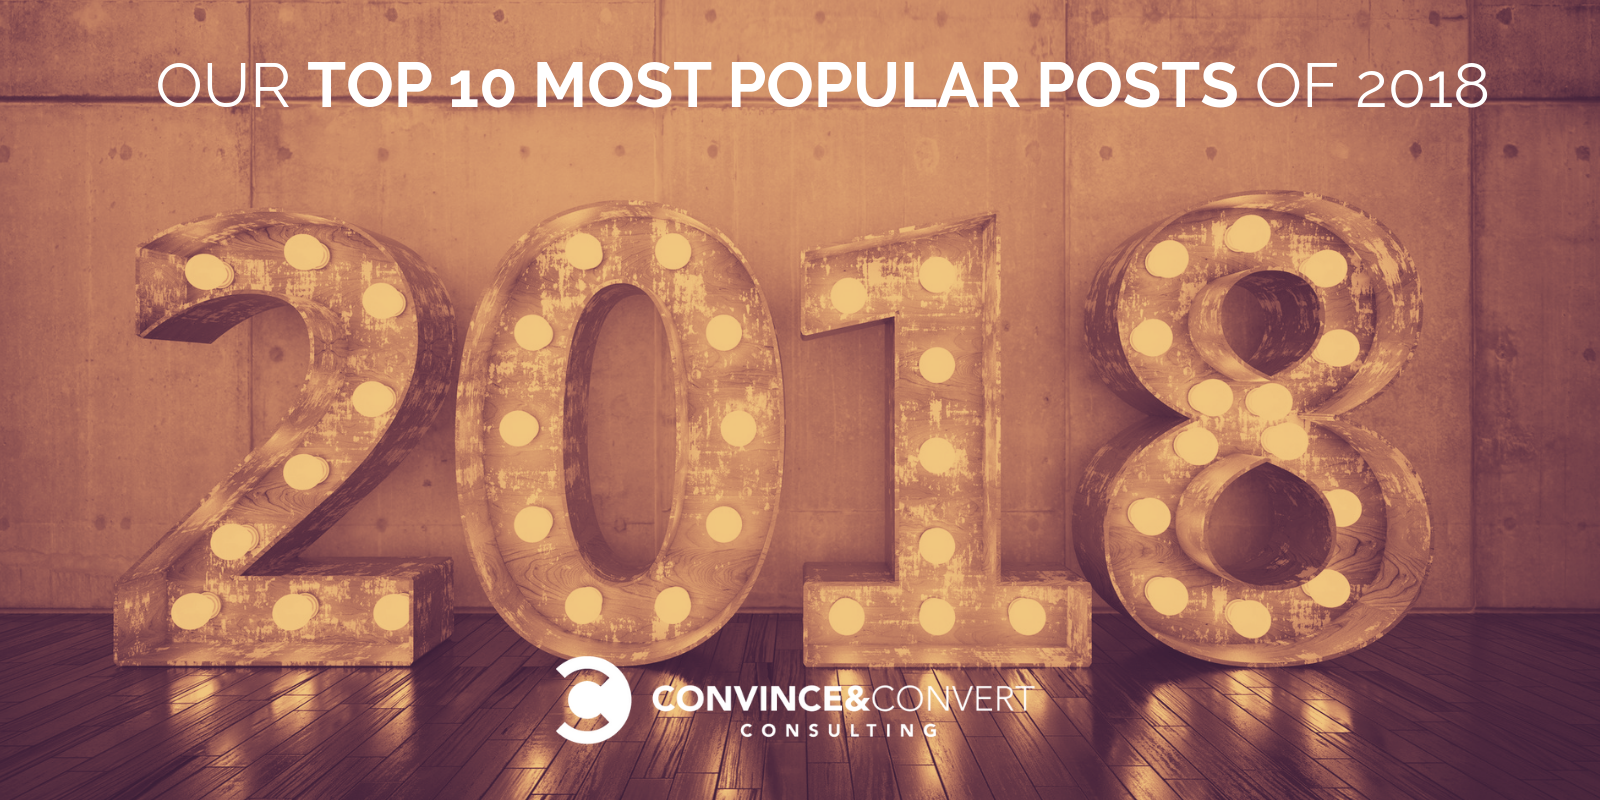 Our Top 10 Most Popular Posts of 2018